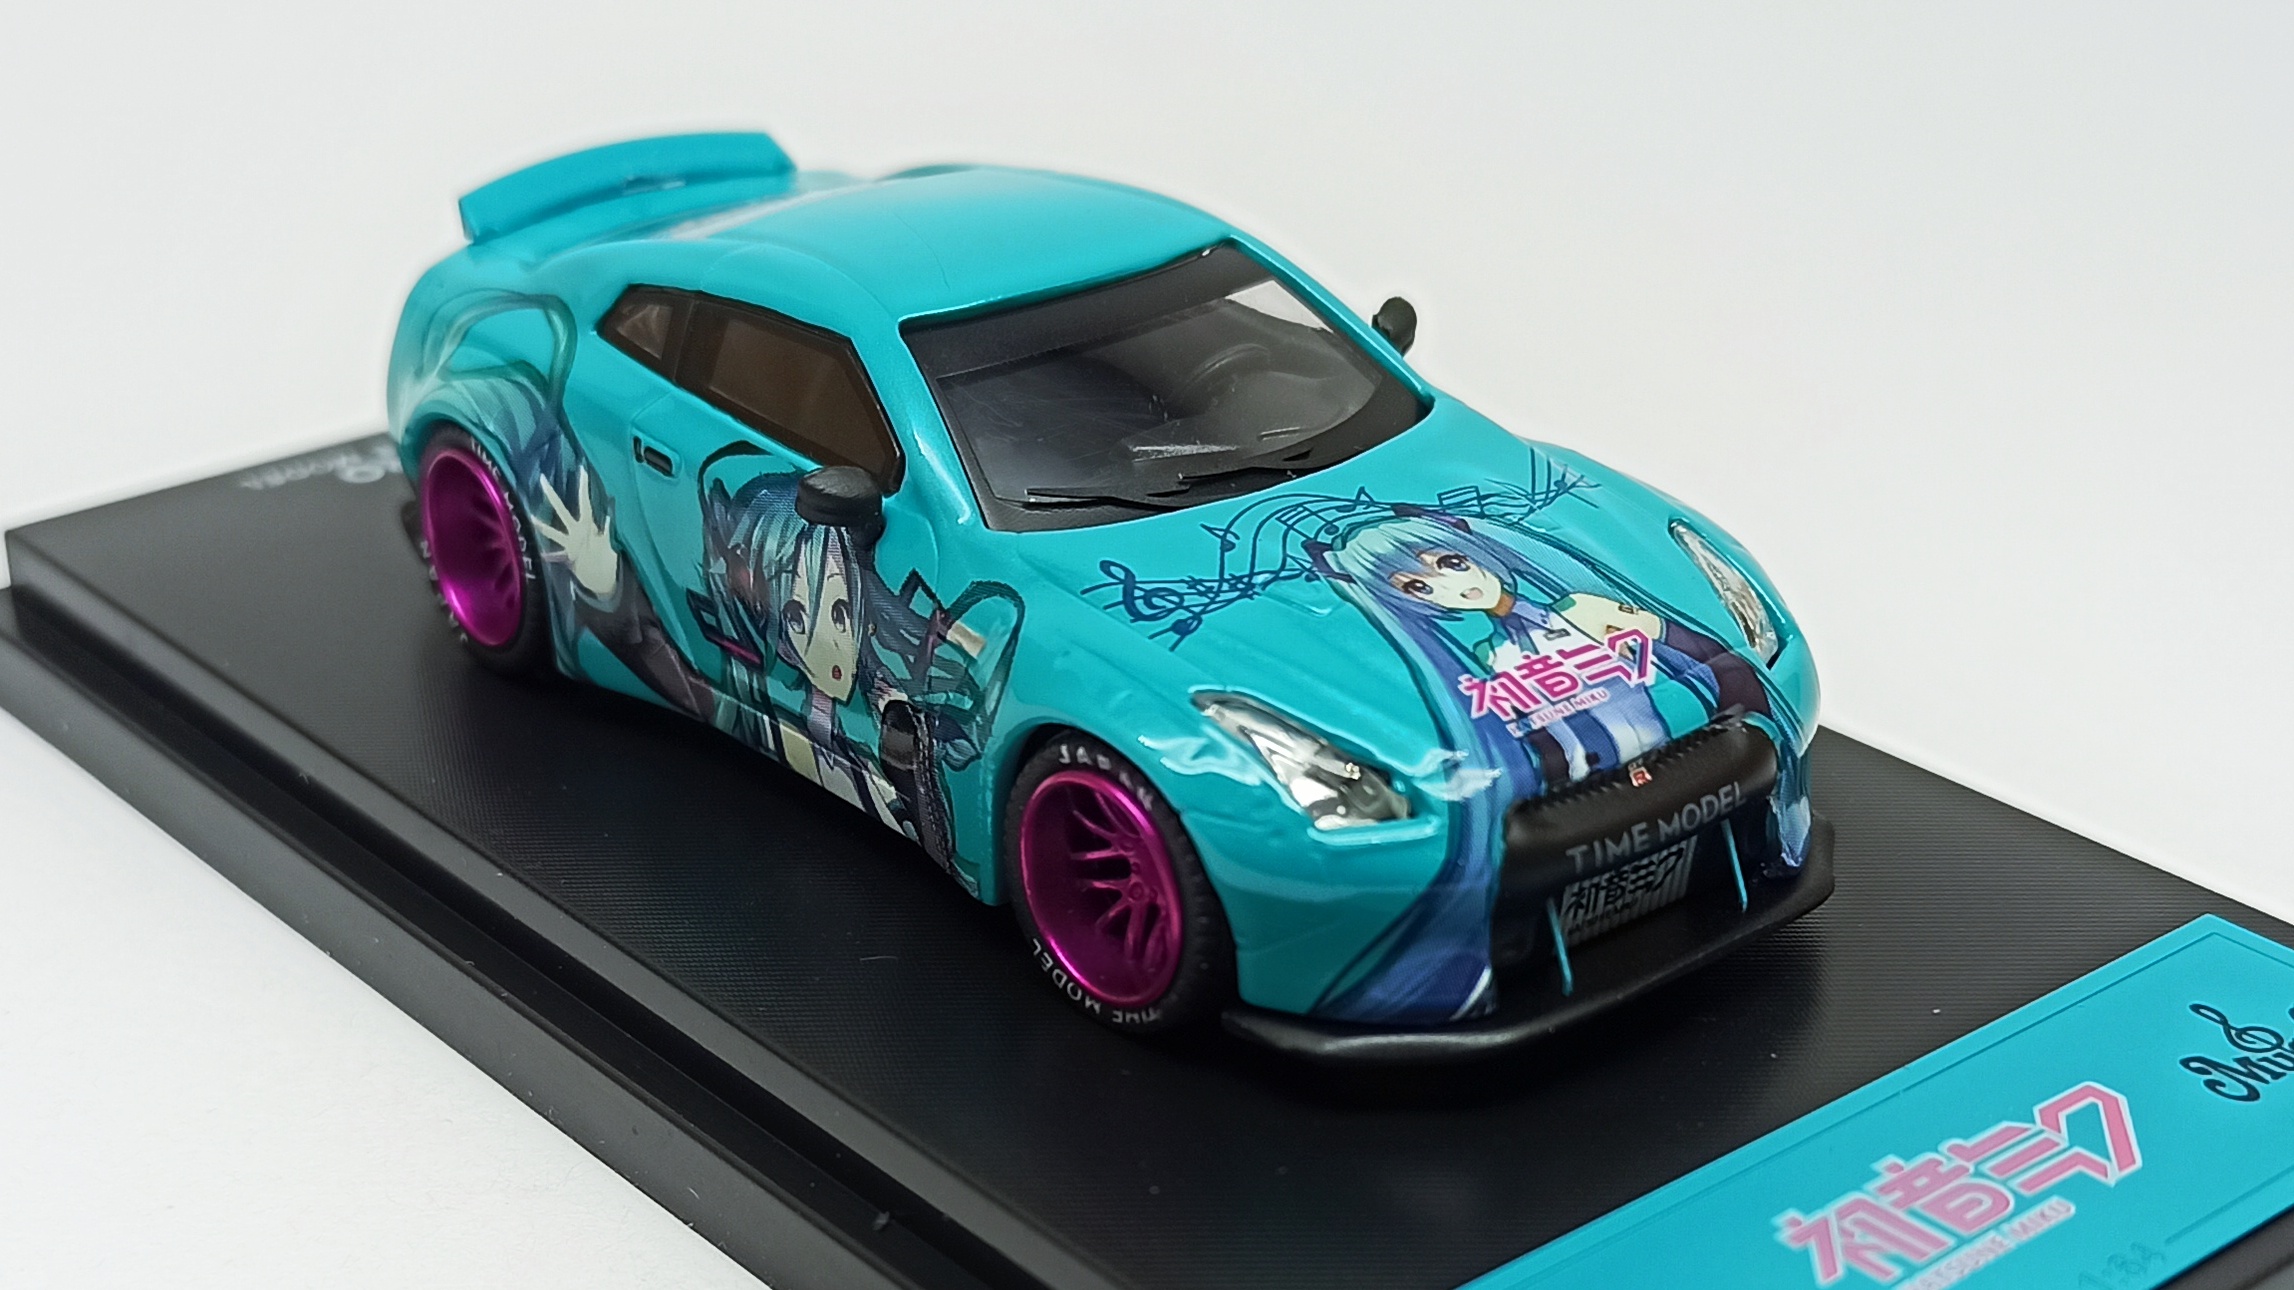 Time Micro Time Model Nissan GT-R (R35) LB Performance Liberty Walk (GT wing / duck tail) Miku Hatsune light turquoise